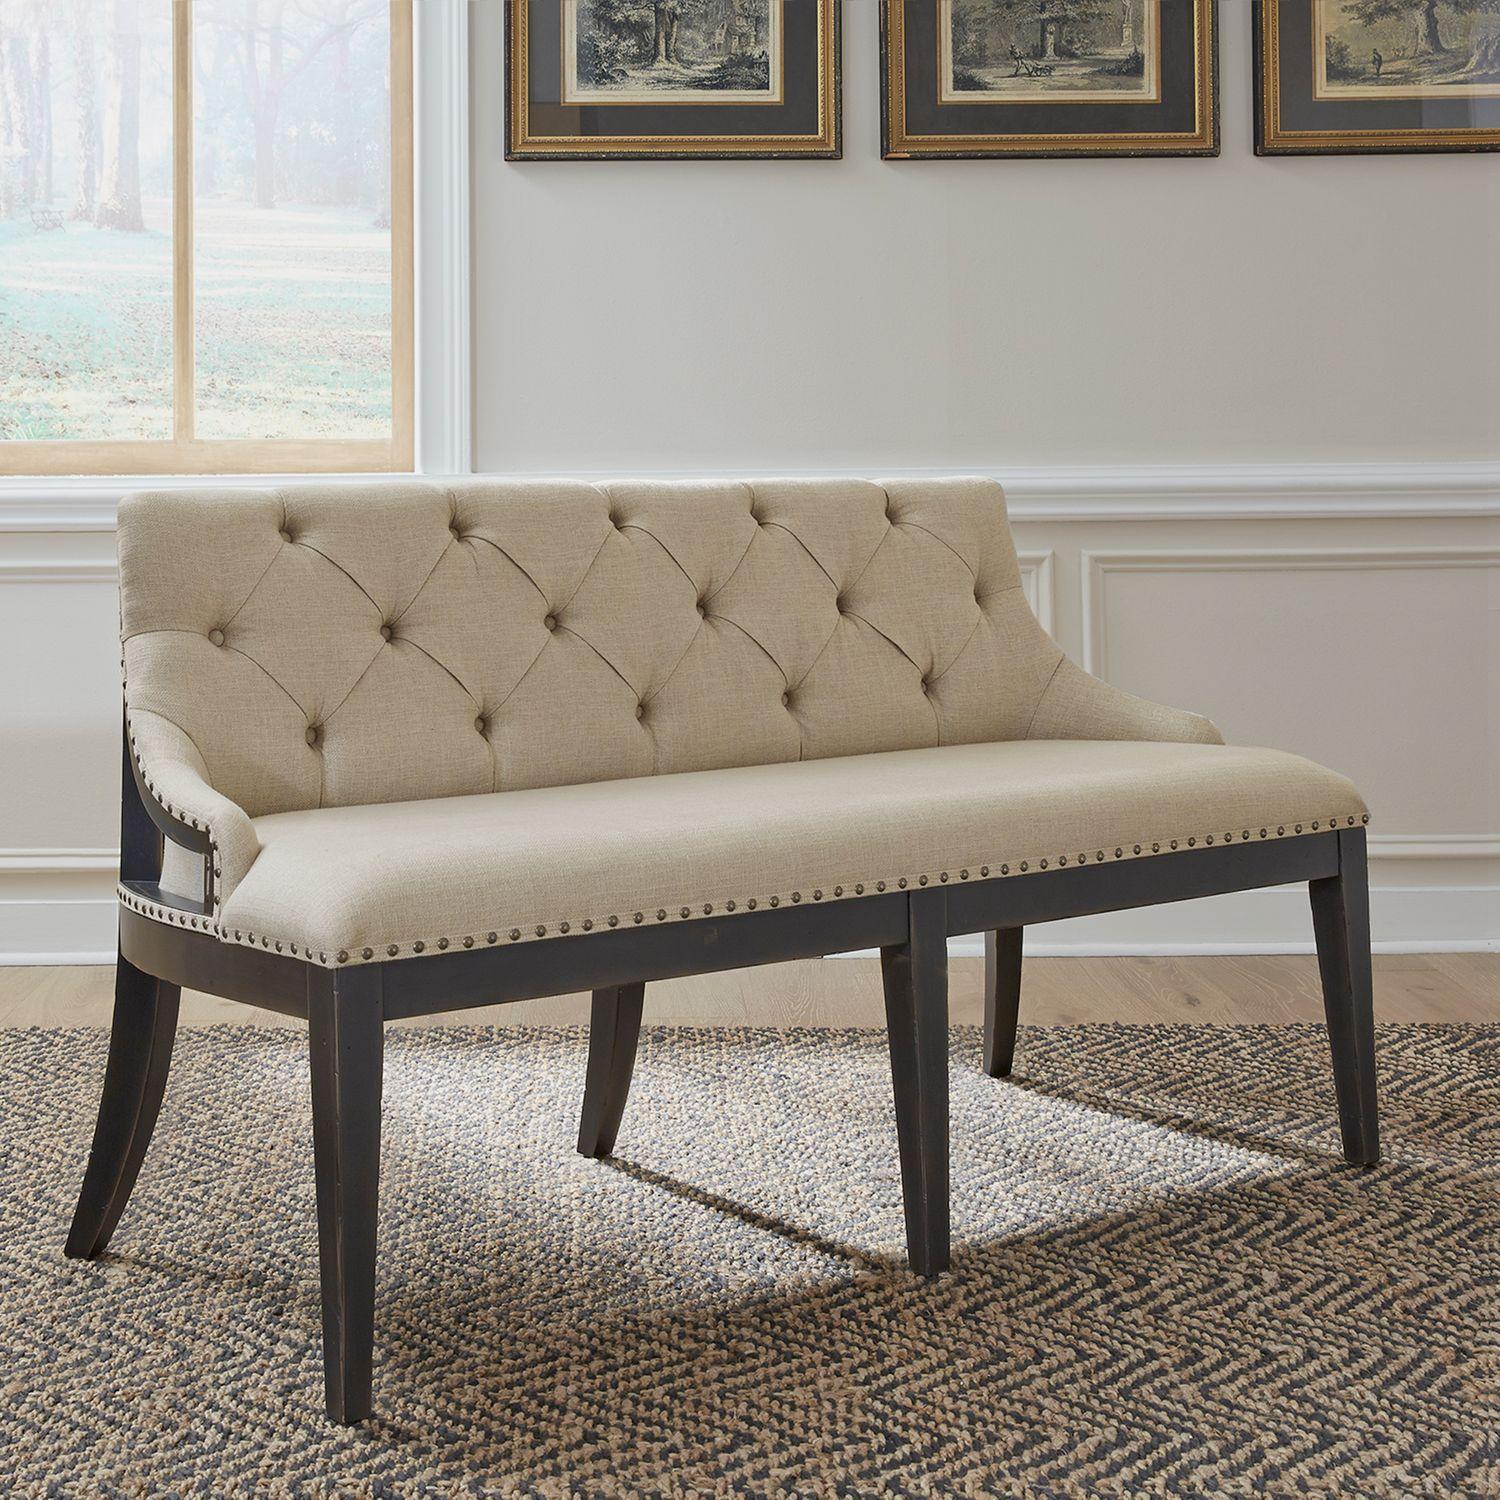 Transitional Dining Bench Americana Farmhouse (615-DR) 615-C6501B-B in Taupe, Black Linen